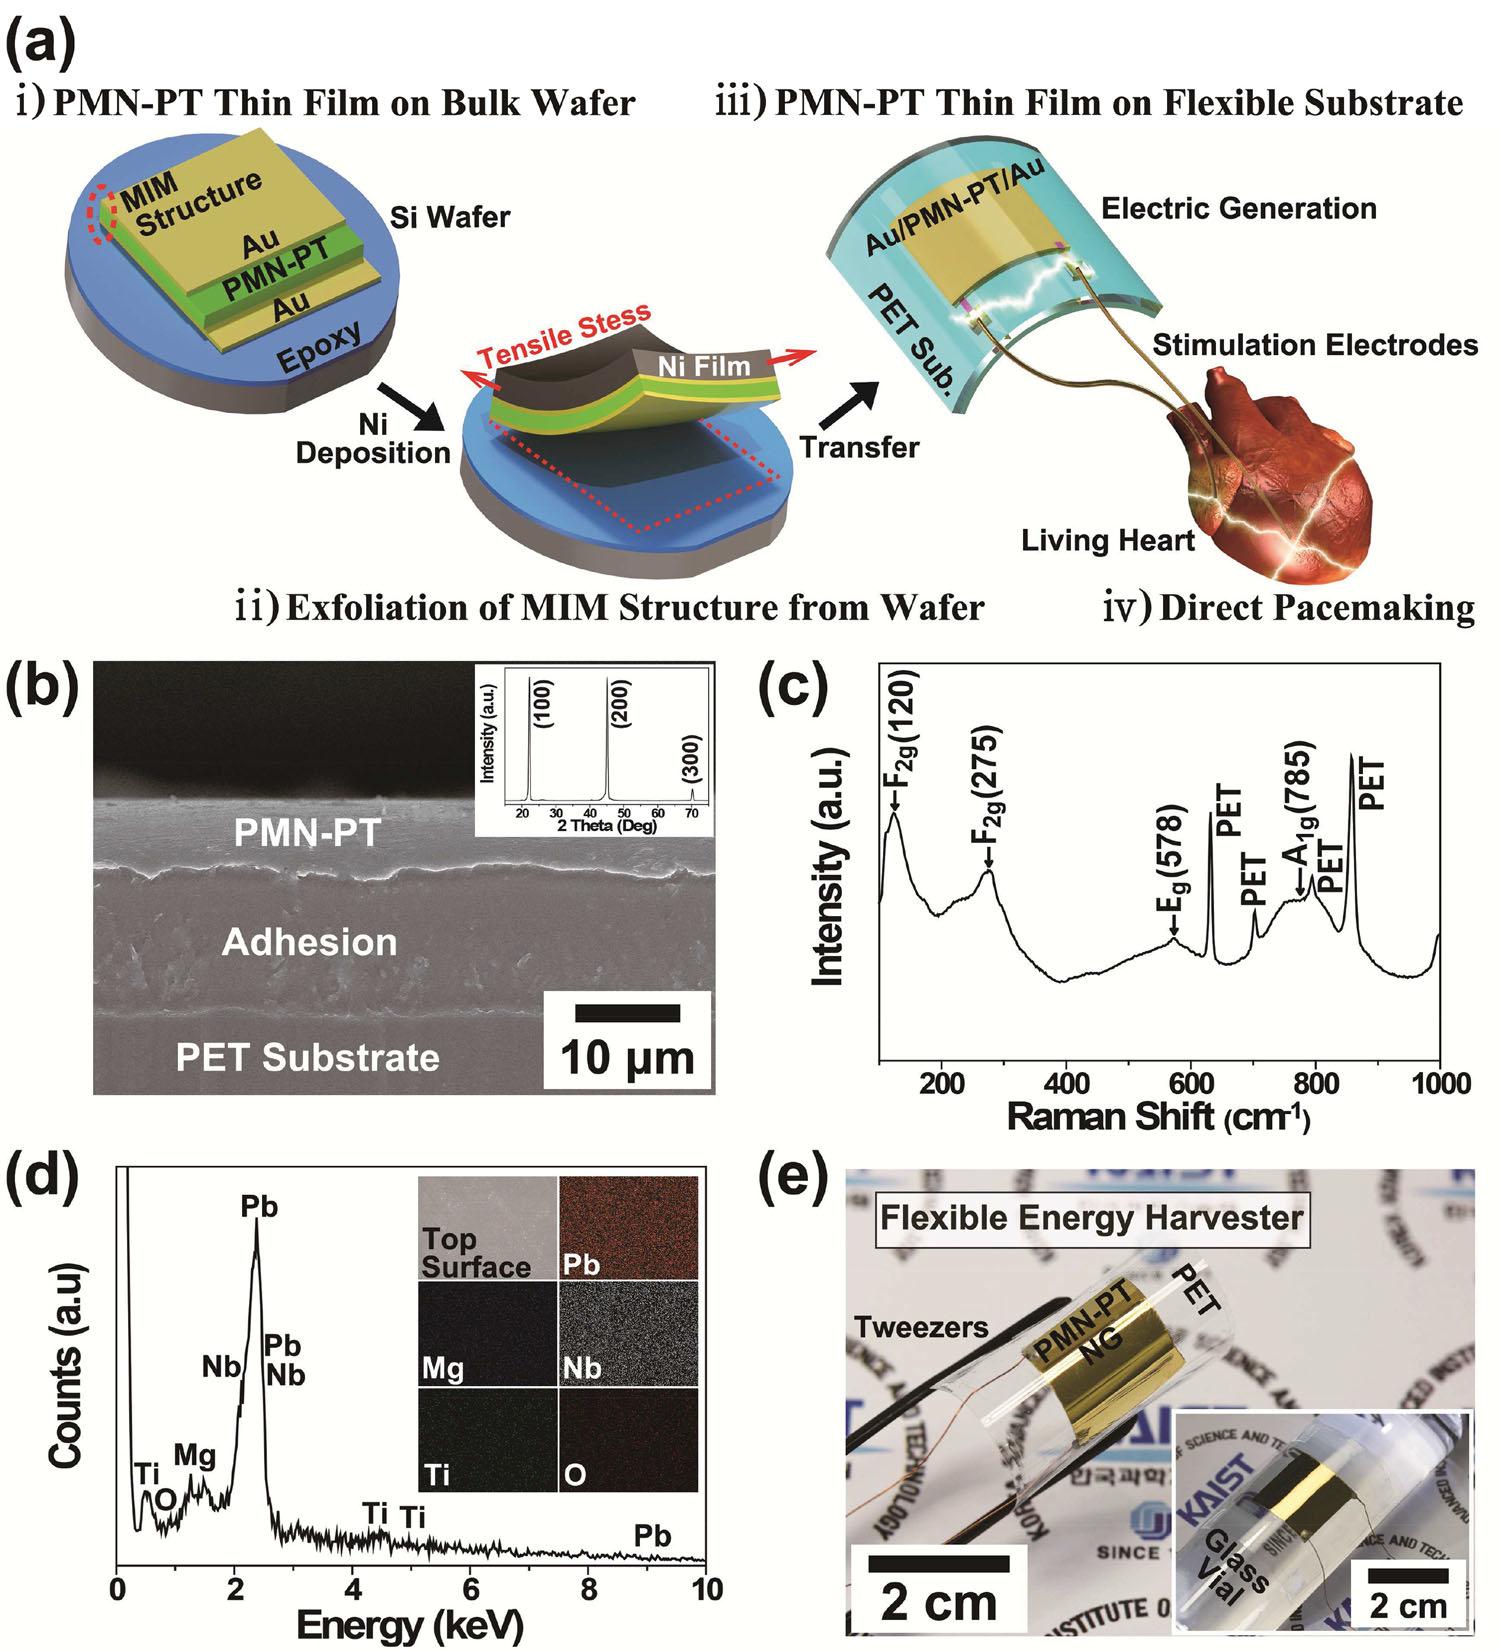 (a) Schematic illustration of the fabrication process and biomedical application of fl exible PMN-PT piezoelectric energy harvester. (b) Cross-sectional SEM image of the PMN-PT thin fi lm on a PET substrate. The inset shows an XRD pattern of PMN-PT thin fi lm. (c) Raman spectrum obtained from PMN-PT thin fi lm. The indexed sharp spectra agrees well with the typical feature of perovskite PMN-PT. (d) EDS curve analyzed from the top surface of PMN-PT thin fi lm. The insets show the EDS elemental mapping result. (e) Photograph of fl exible PMN-PT thin fi lm energy harvester on a PET substrate. The inset presents that the NG device provides conformal contact on curvilinear surface of glass vial.